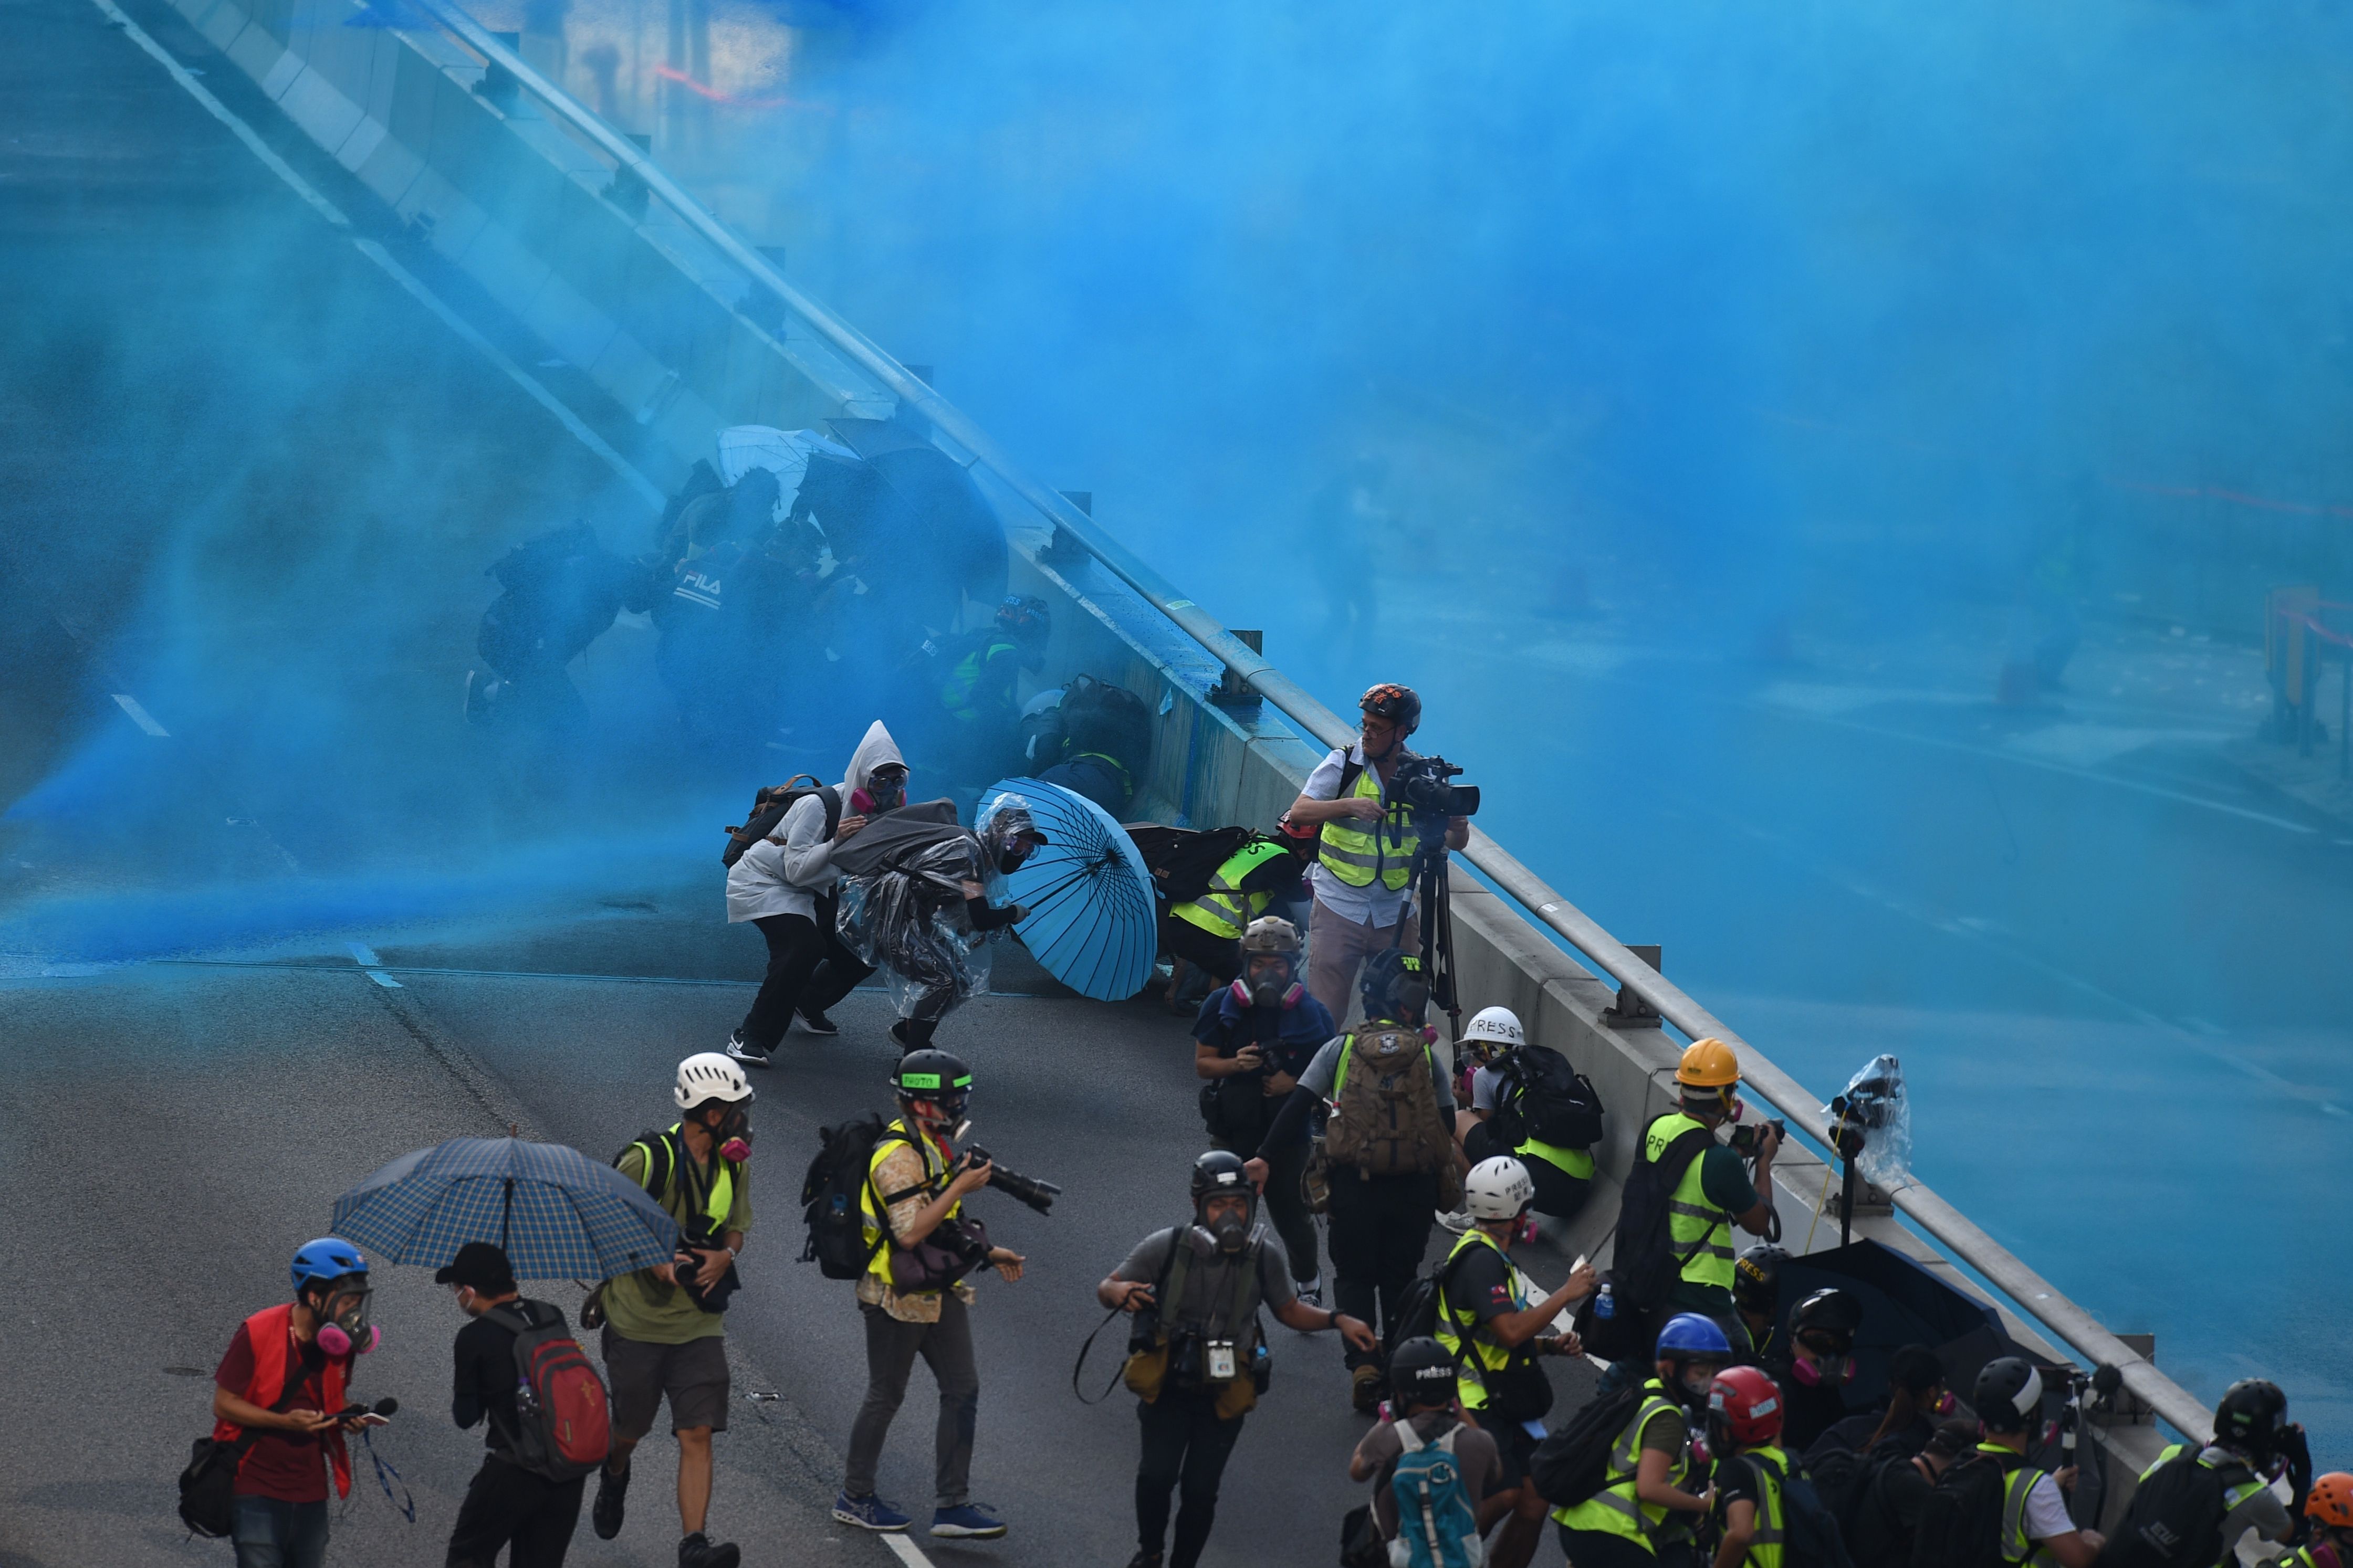 Members of the media (in yellow vests) look on as Hong Kong police fire water cannon from the central government complex